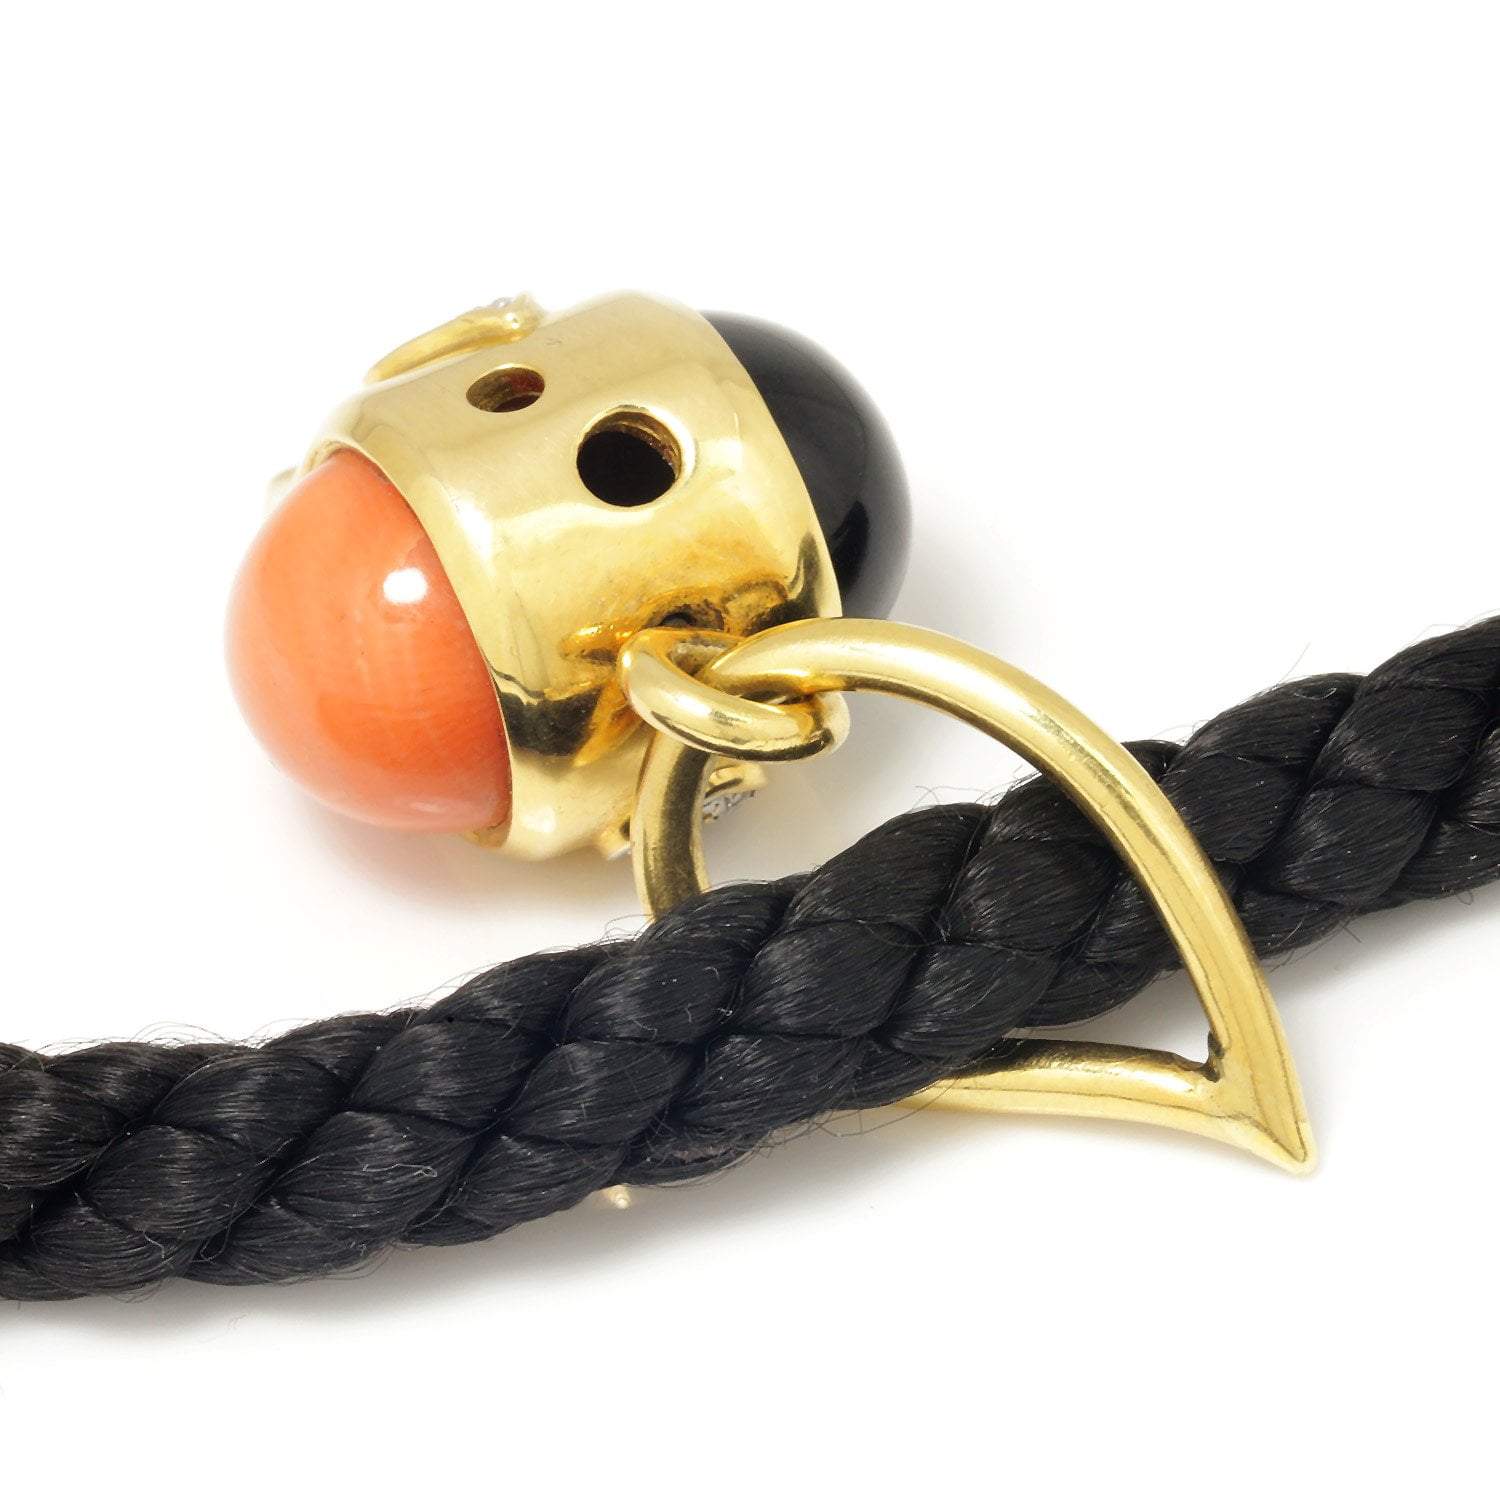 Vintage Onyx & Coral Pendant Black Thread Necklace with Diamonds - Once  Upon A Diamond